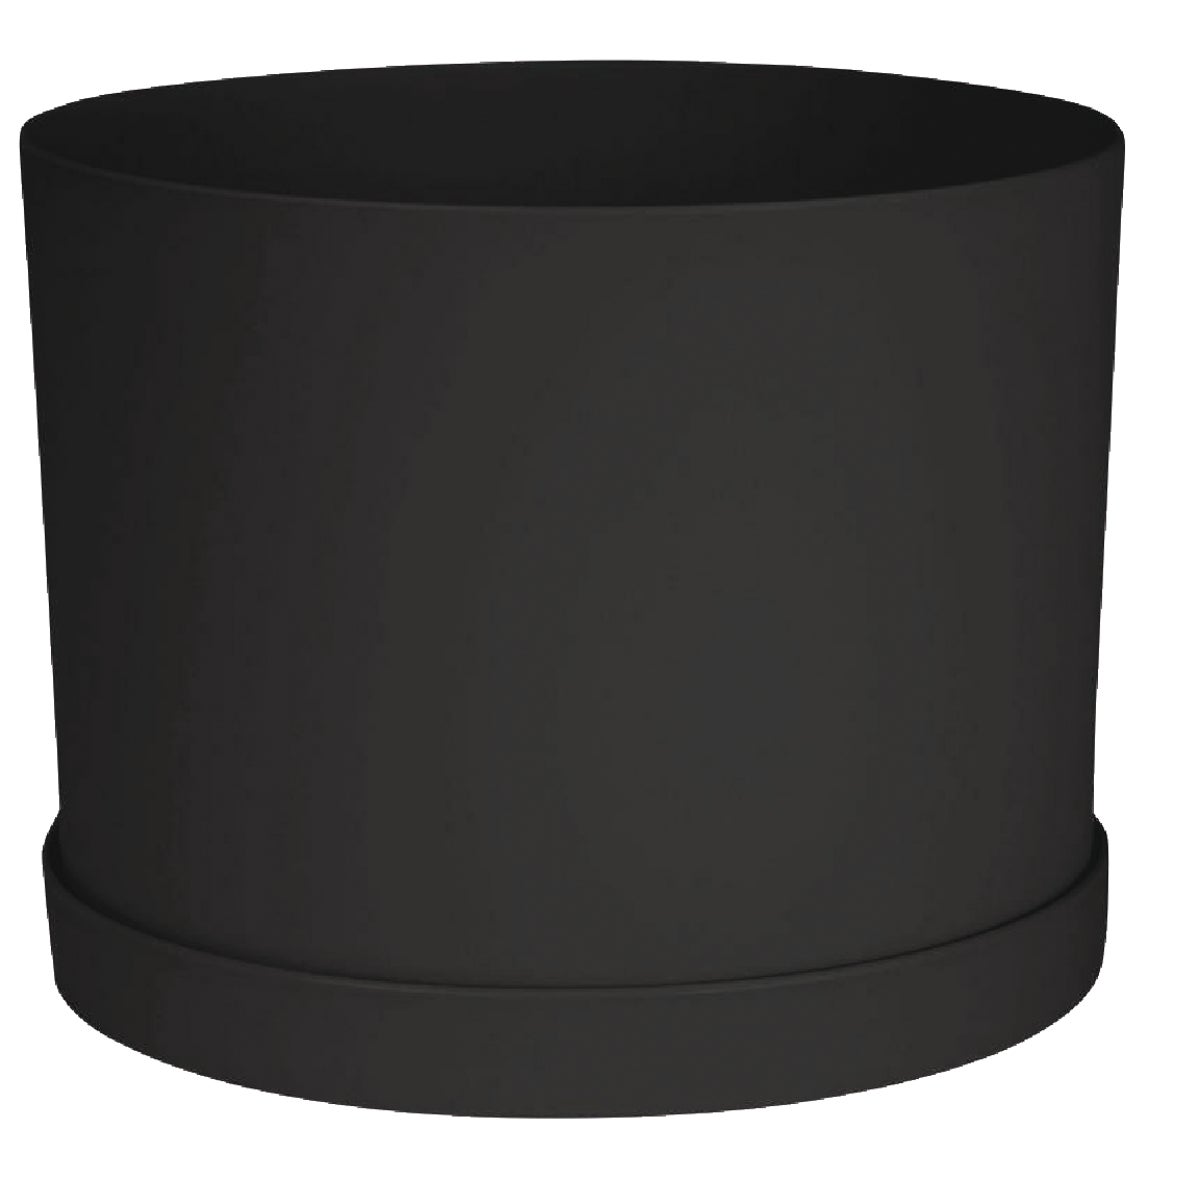 Bloem Mathers Collection 6 In. Black Plastic Planter